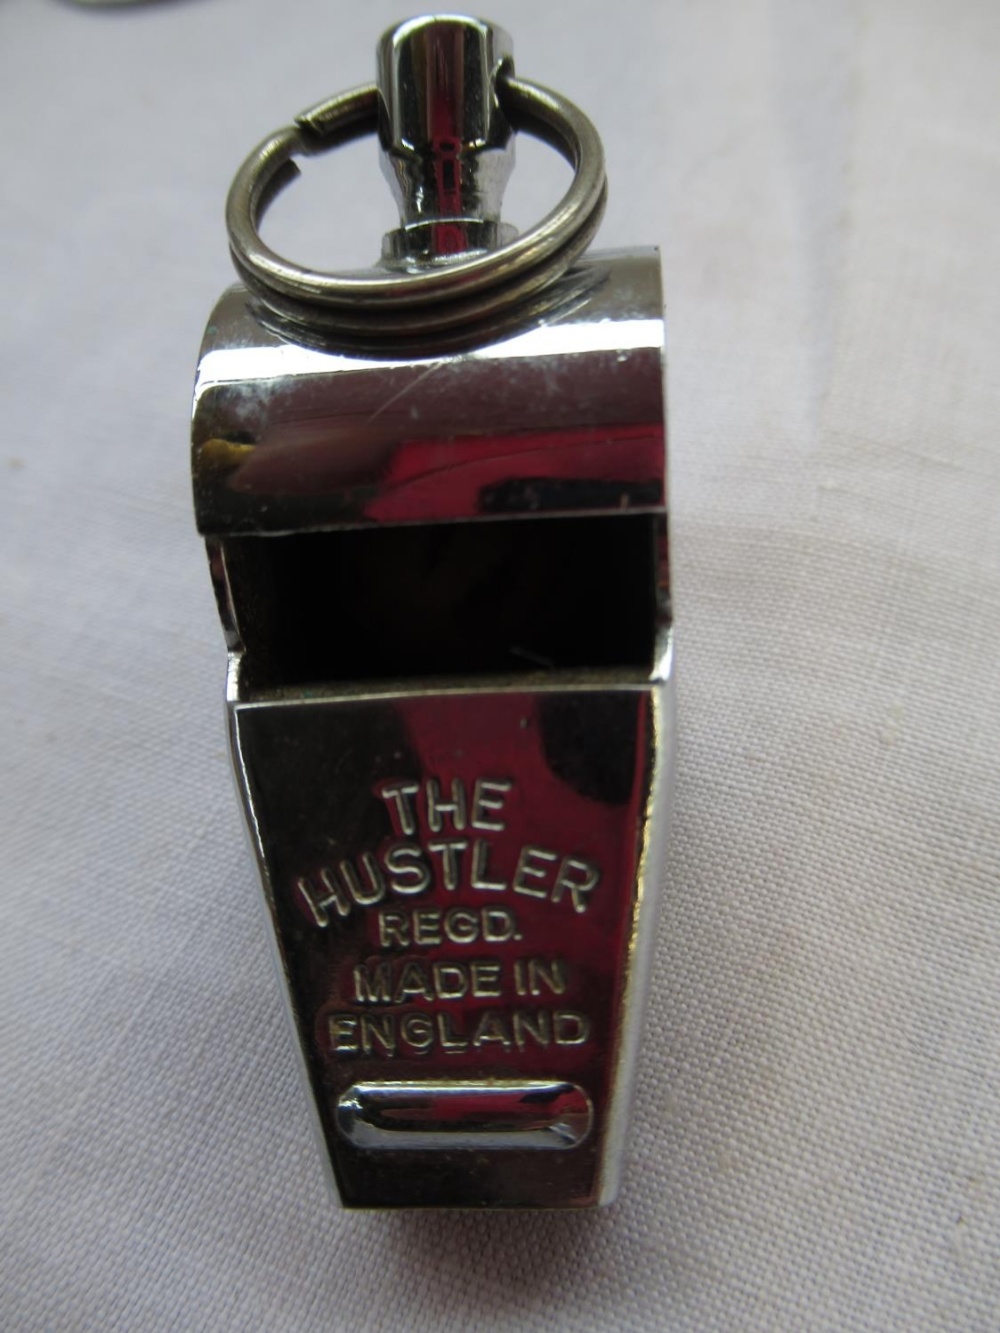 J. Hudson ARP whistle, The Hustler whistle, a coin carrier, a collection of Bus related badges incl. - Image 4 of 4